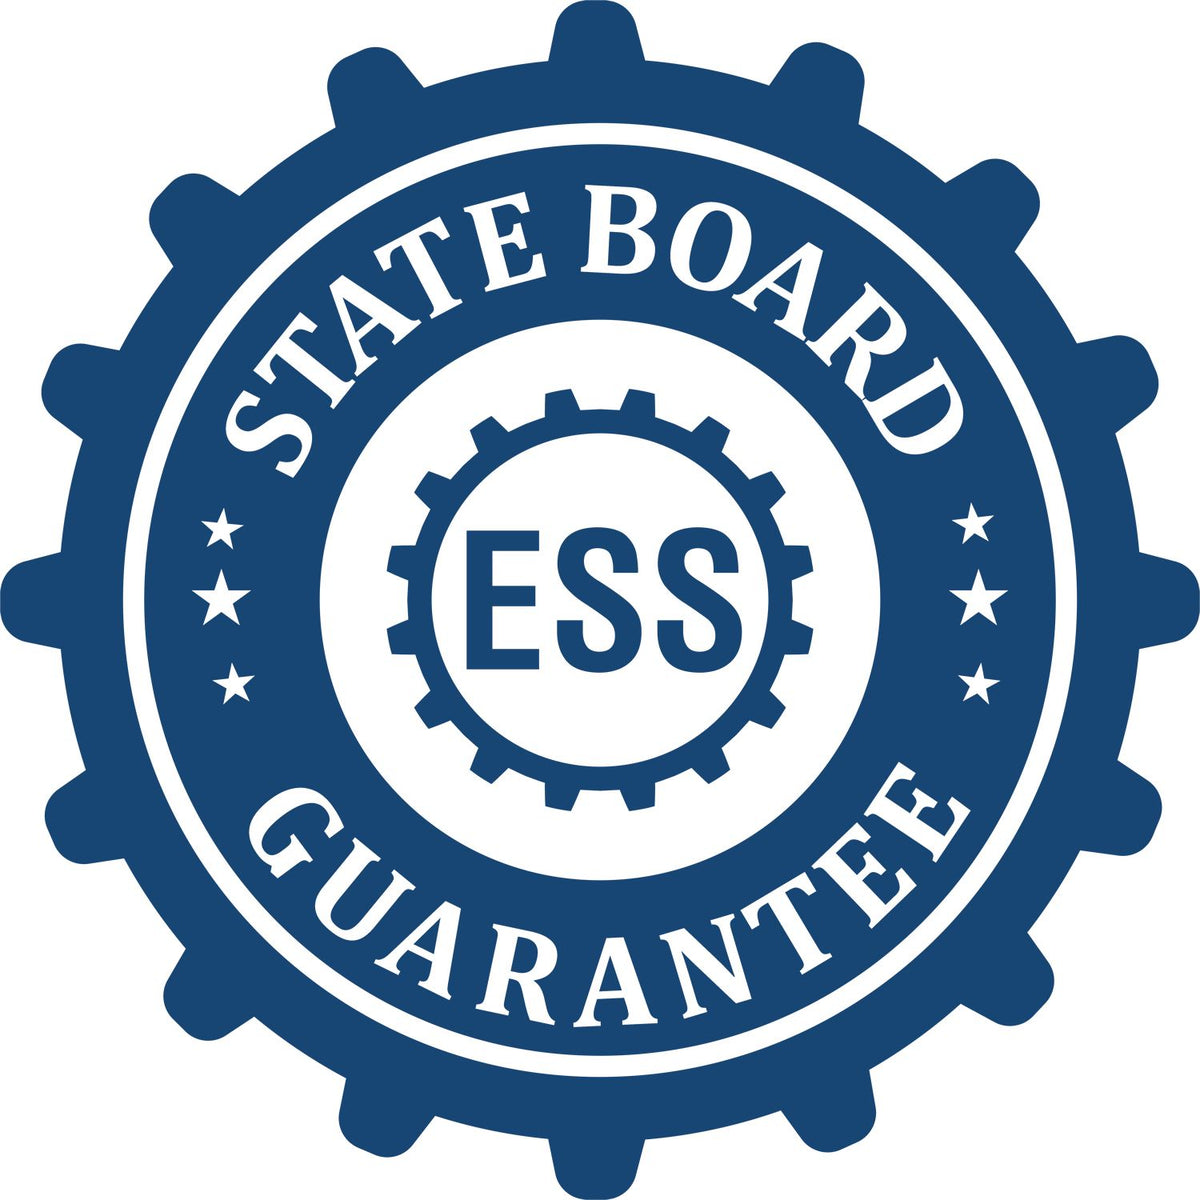 An emblem in a gear shape illustrating a state board guarantee for the Guam Desk Architect Embossing Seal product.